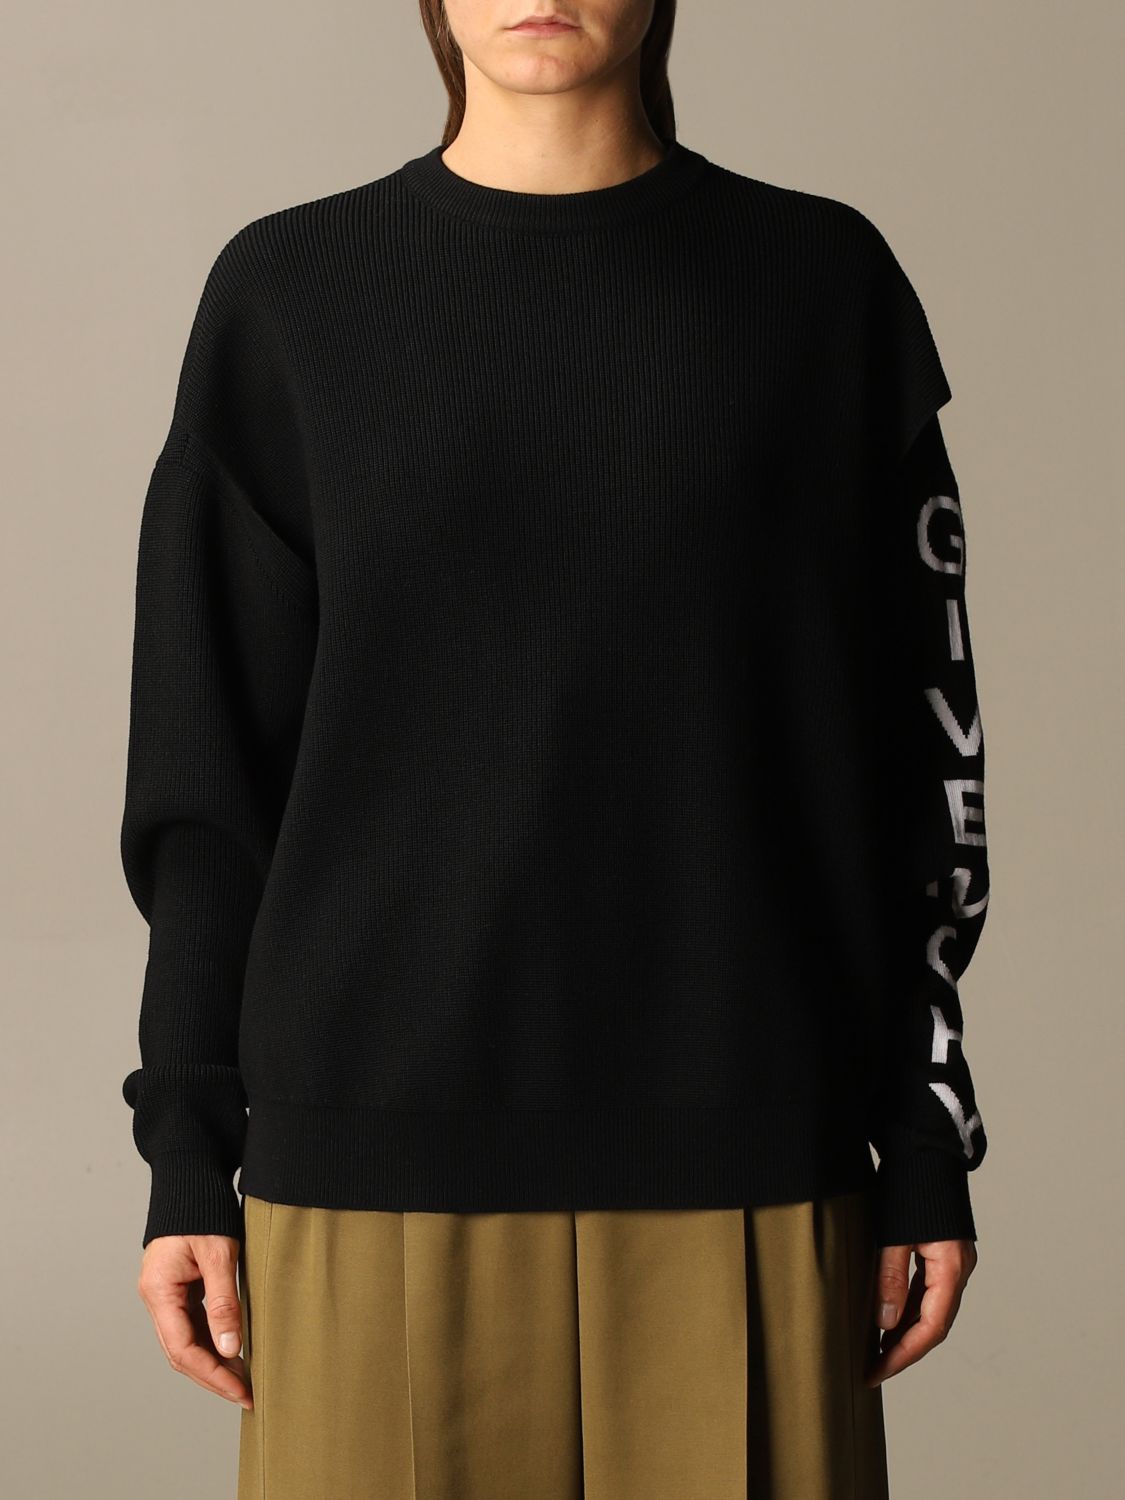 givenchy women jumper